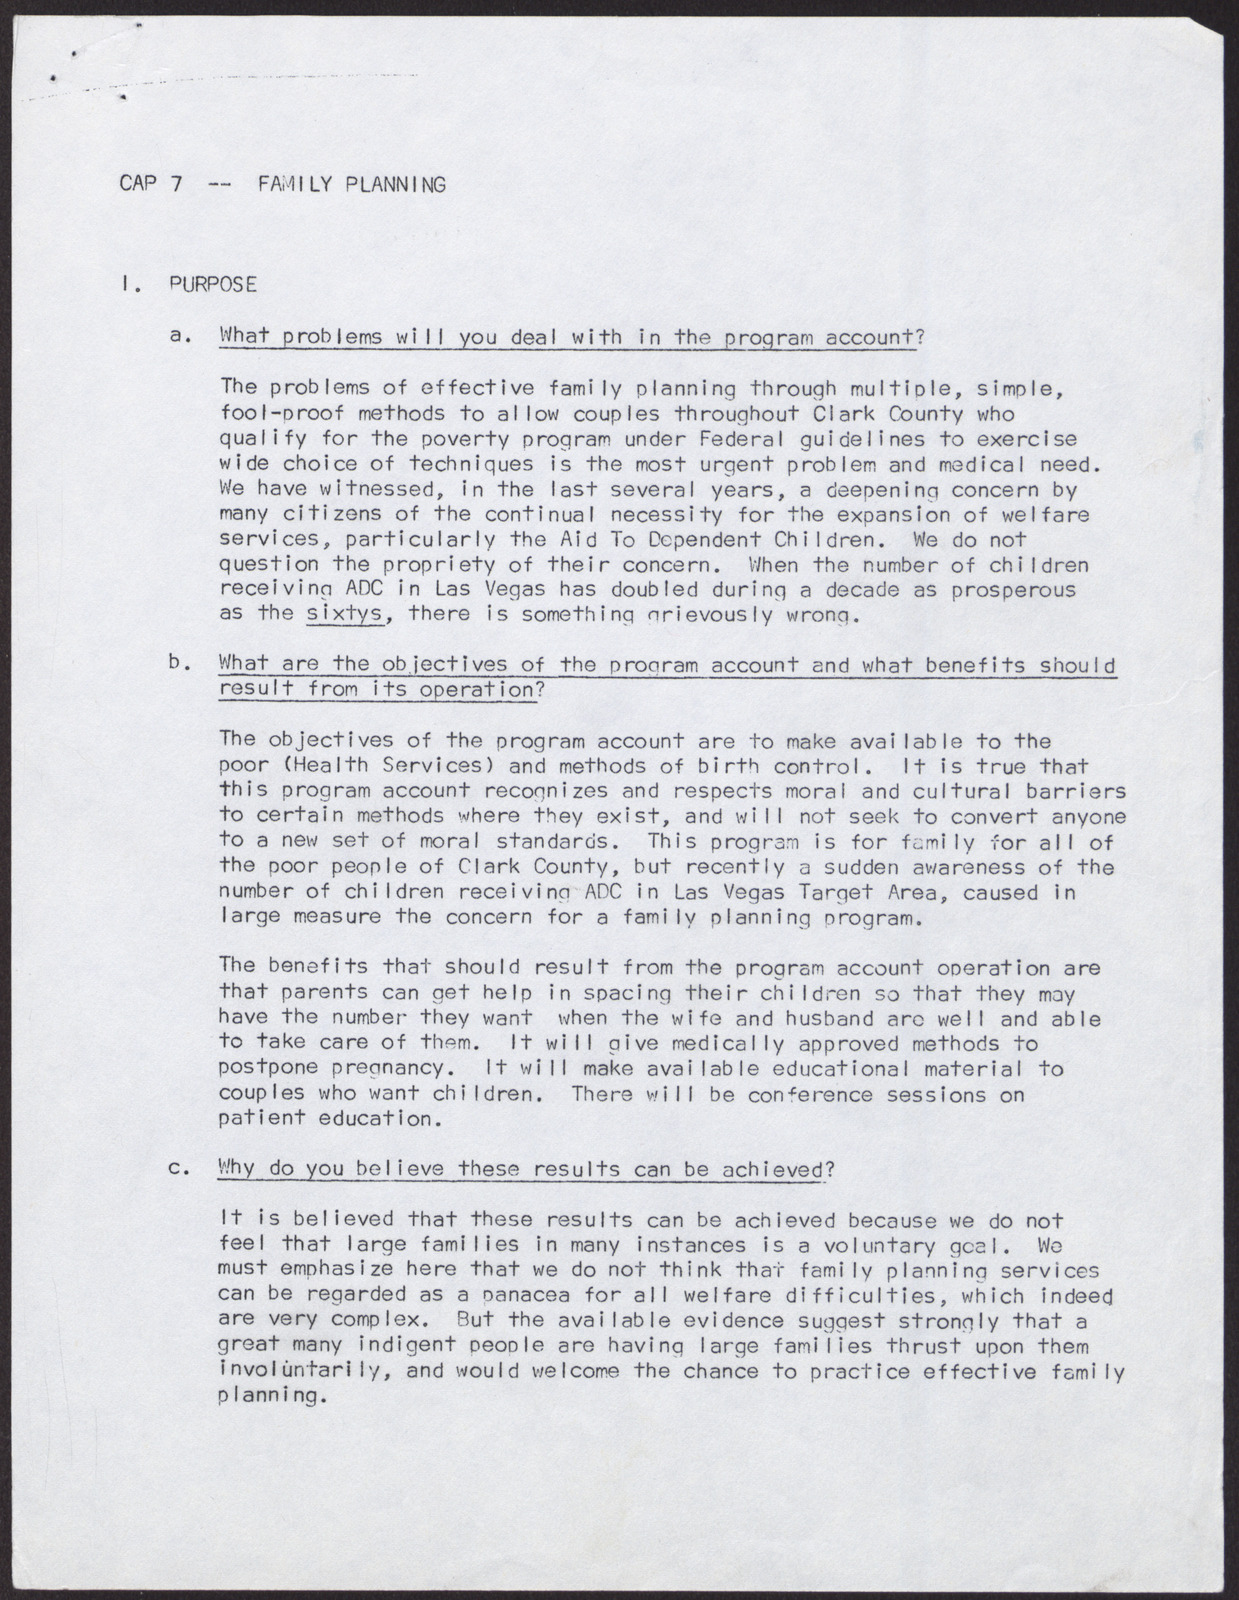 United Fund of Clark County, Inc. Manual of Operations (8 pages, possibly out of sequence or unrelated), no date, page 2